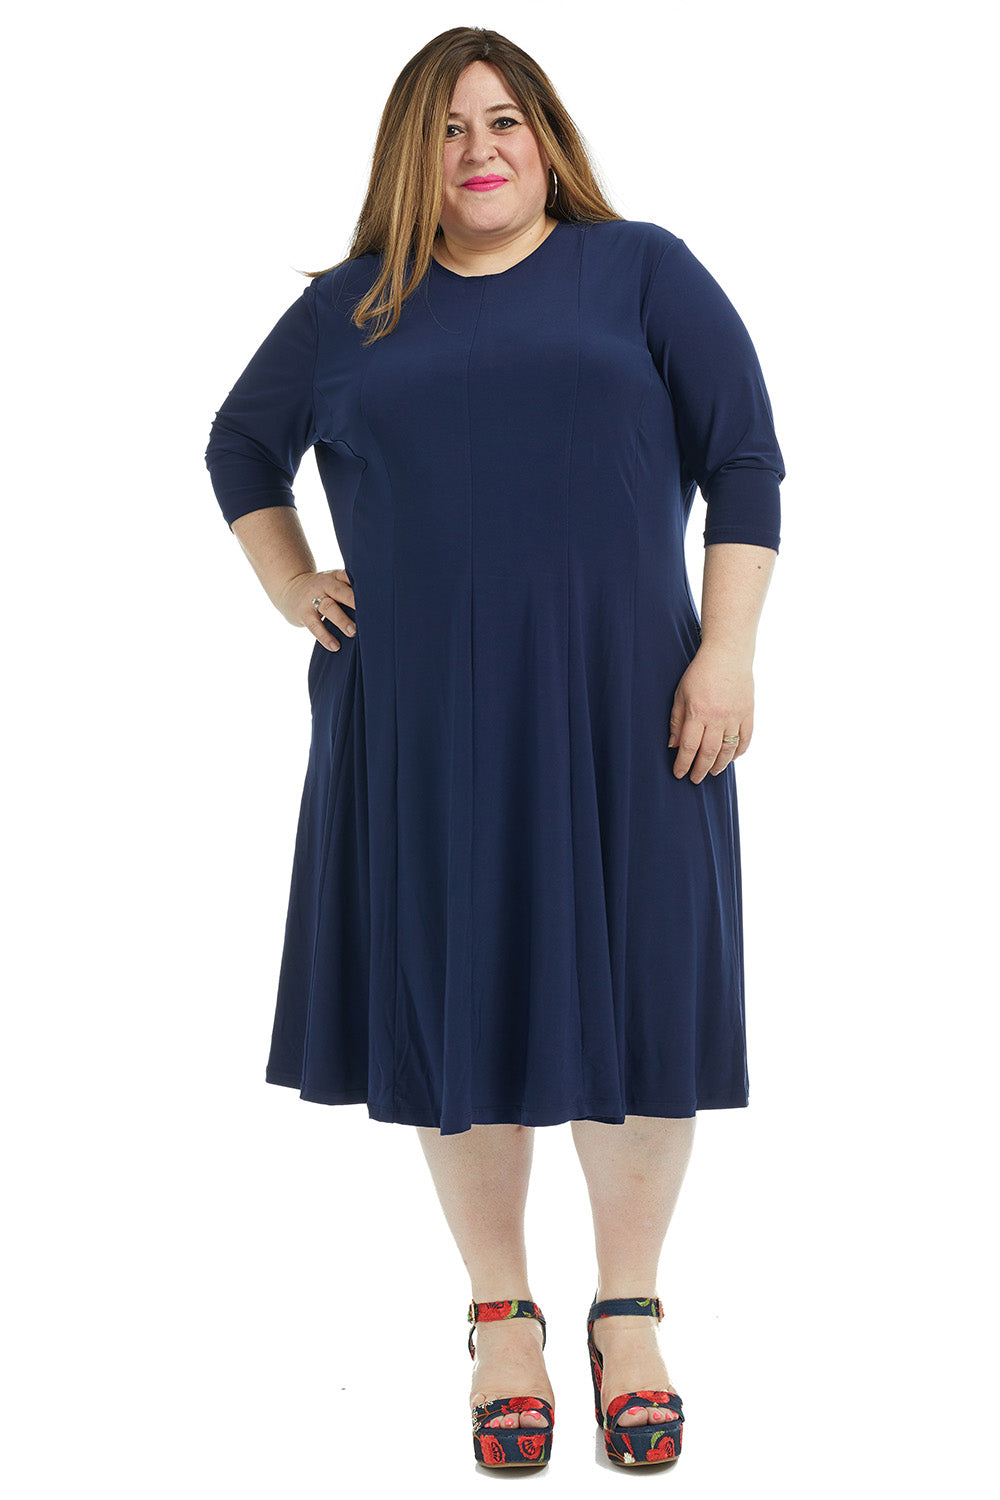 Esteez JUDEE Dress - Womens Classic Fit and Flare Dress with pockets - NAVY